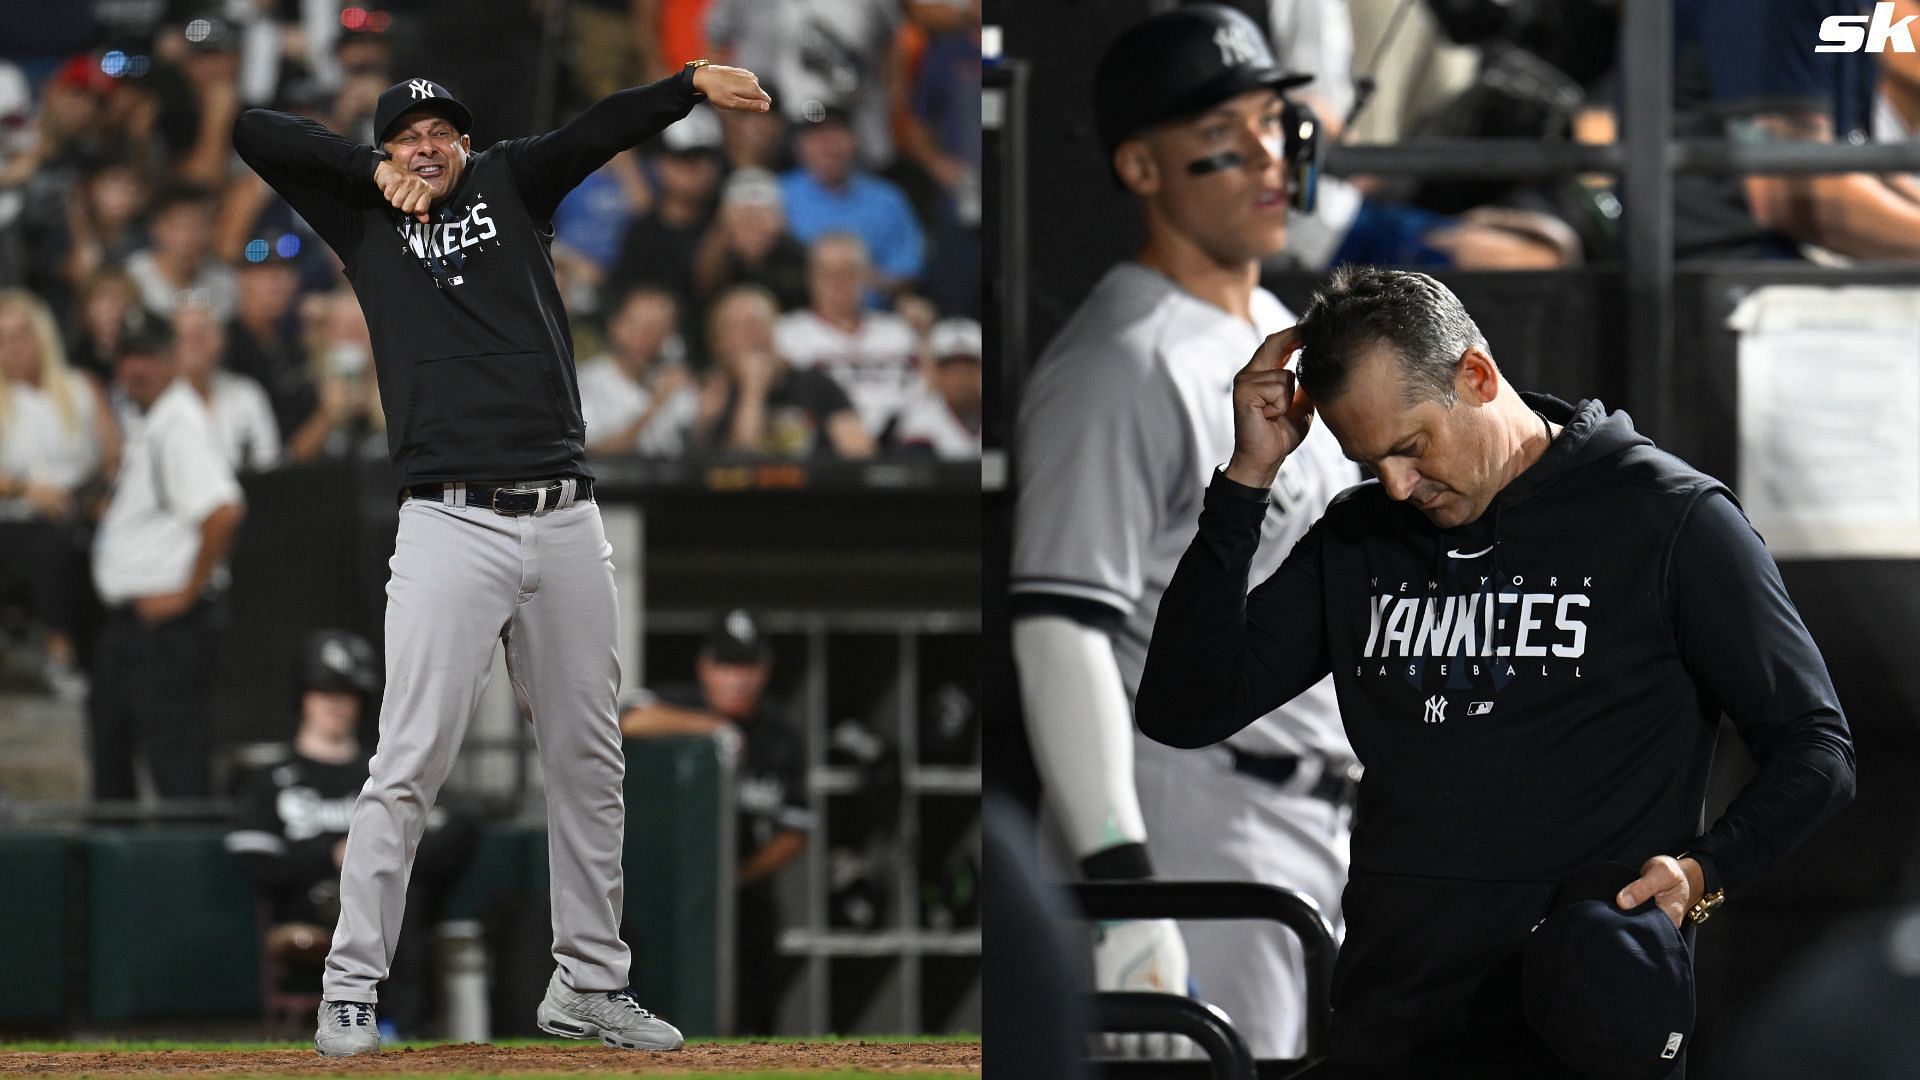 Manager Aaron Boone of the New York Yankees leaves the game after being ejected by home umpire Laz Diaz against the Chicago White Sox at Guaranteed Rate Field